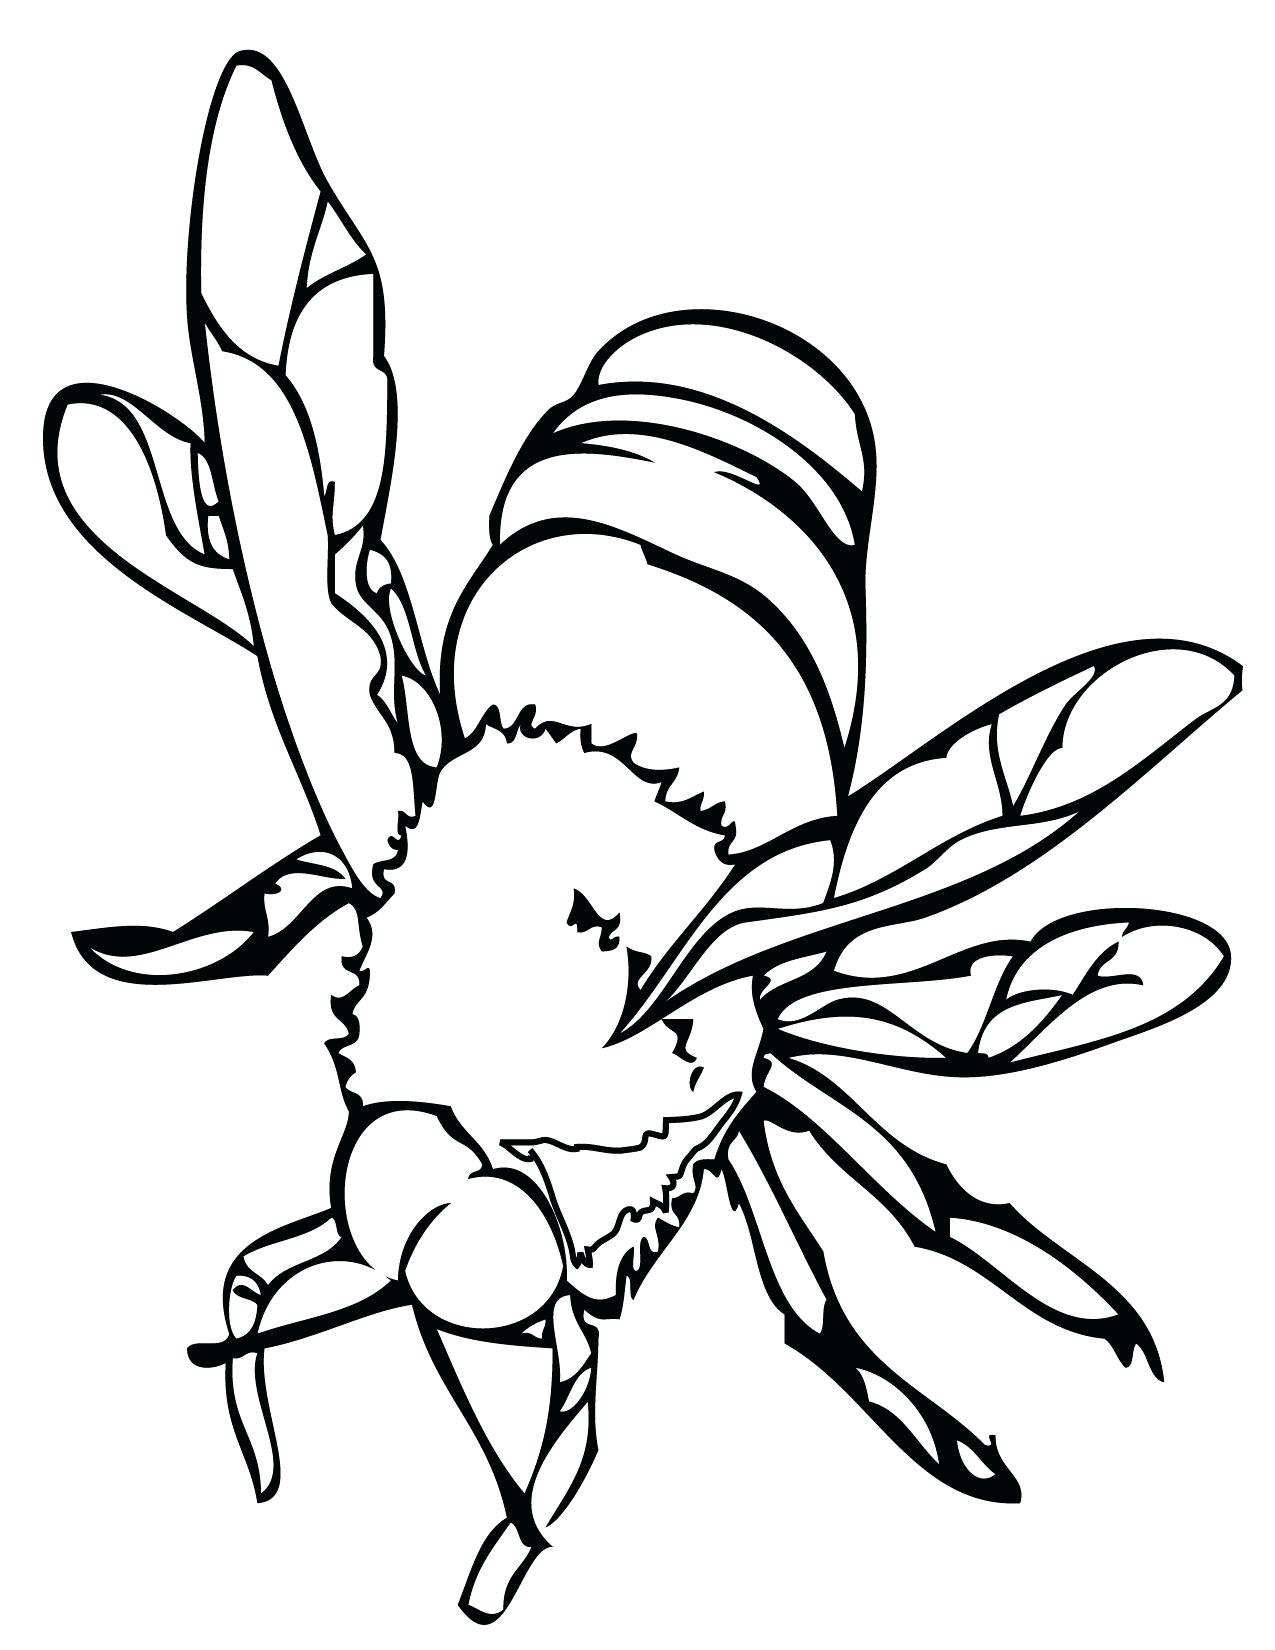 Insect Coloring Pages   Best Coloring Pages For Kids